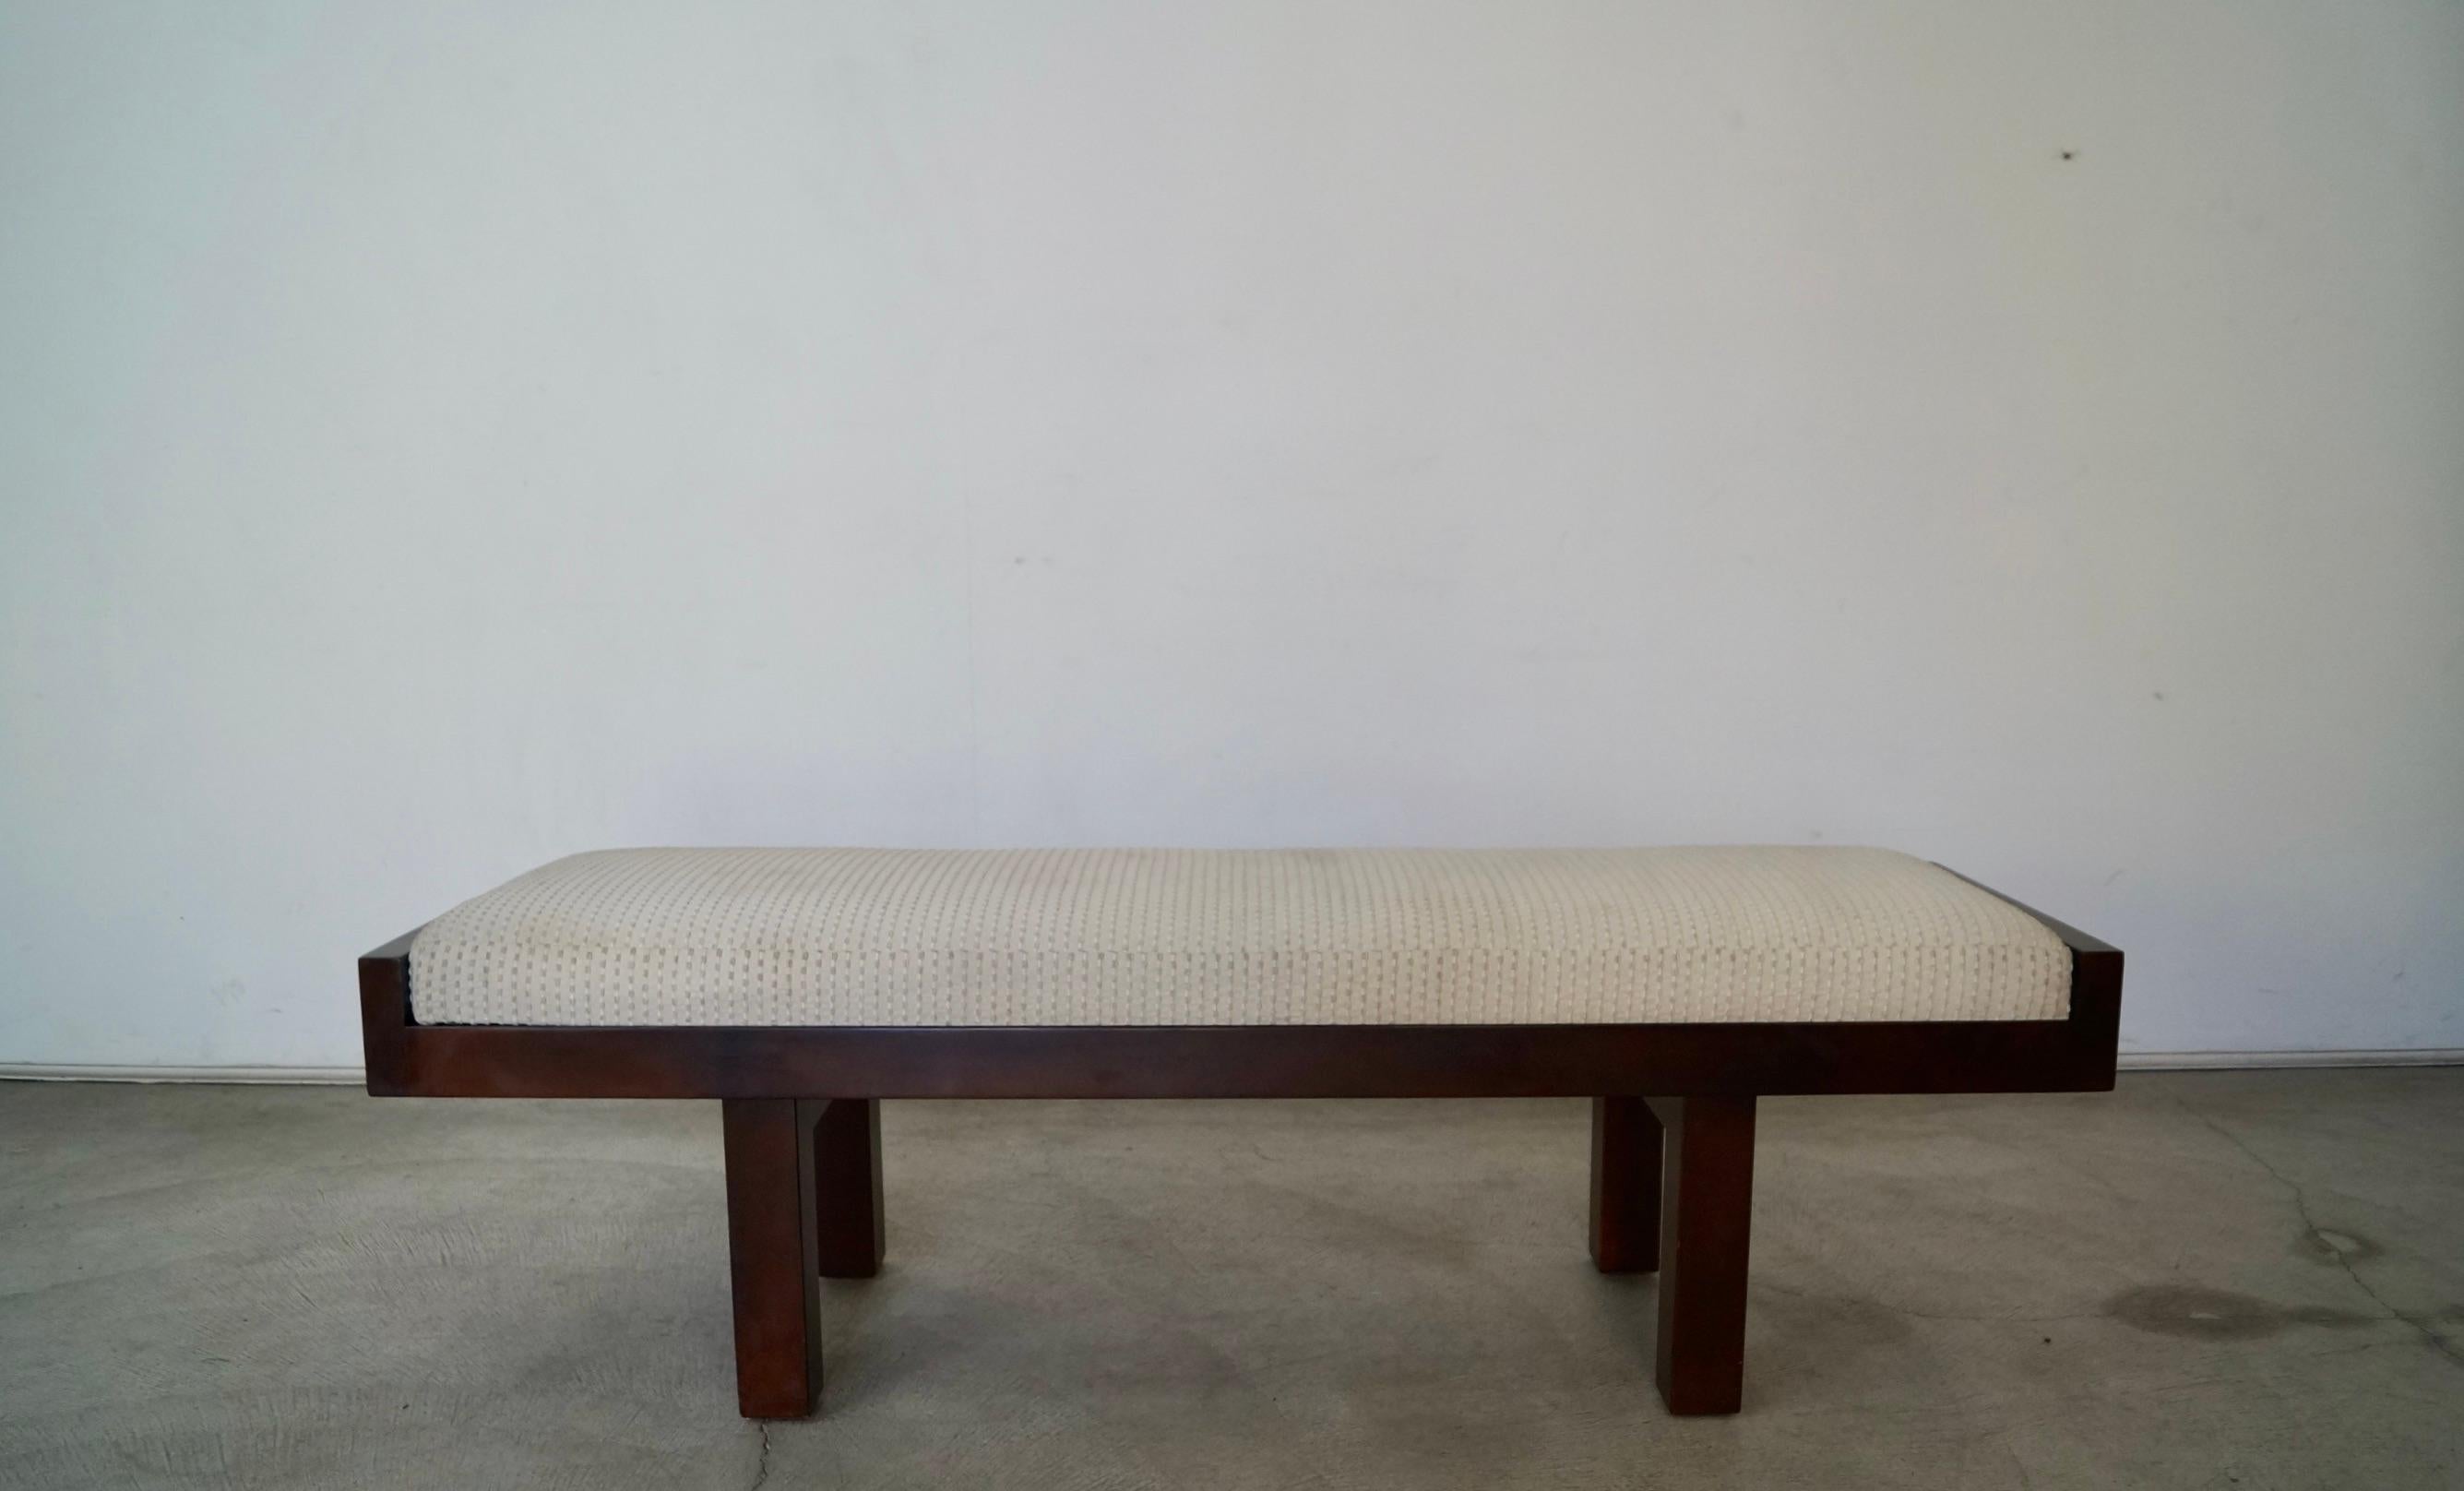 Vintage post-modern bench for sale. Manufactured by Baker Furniture in 2001, and designed by Coach and called the Mantattan bench. Has all the original tags, and the original finish. It has a solid wood frame in a Mid-century Modern style. The